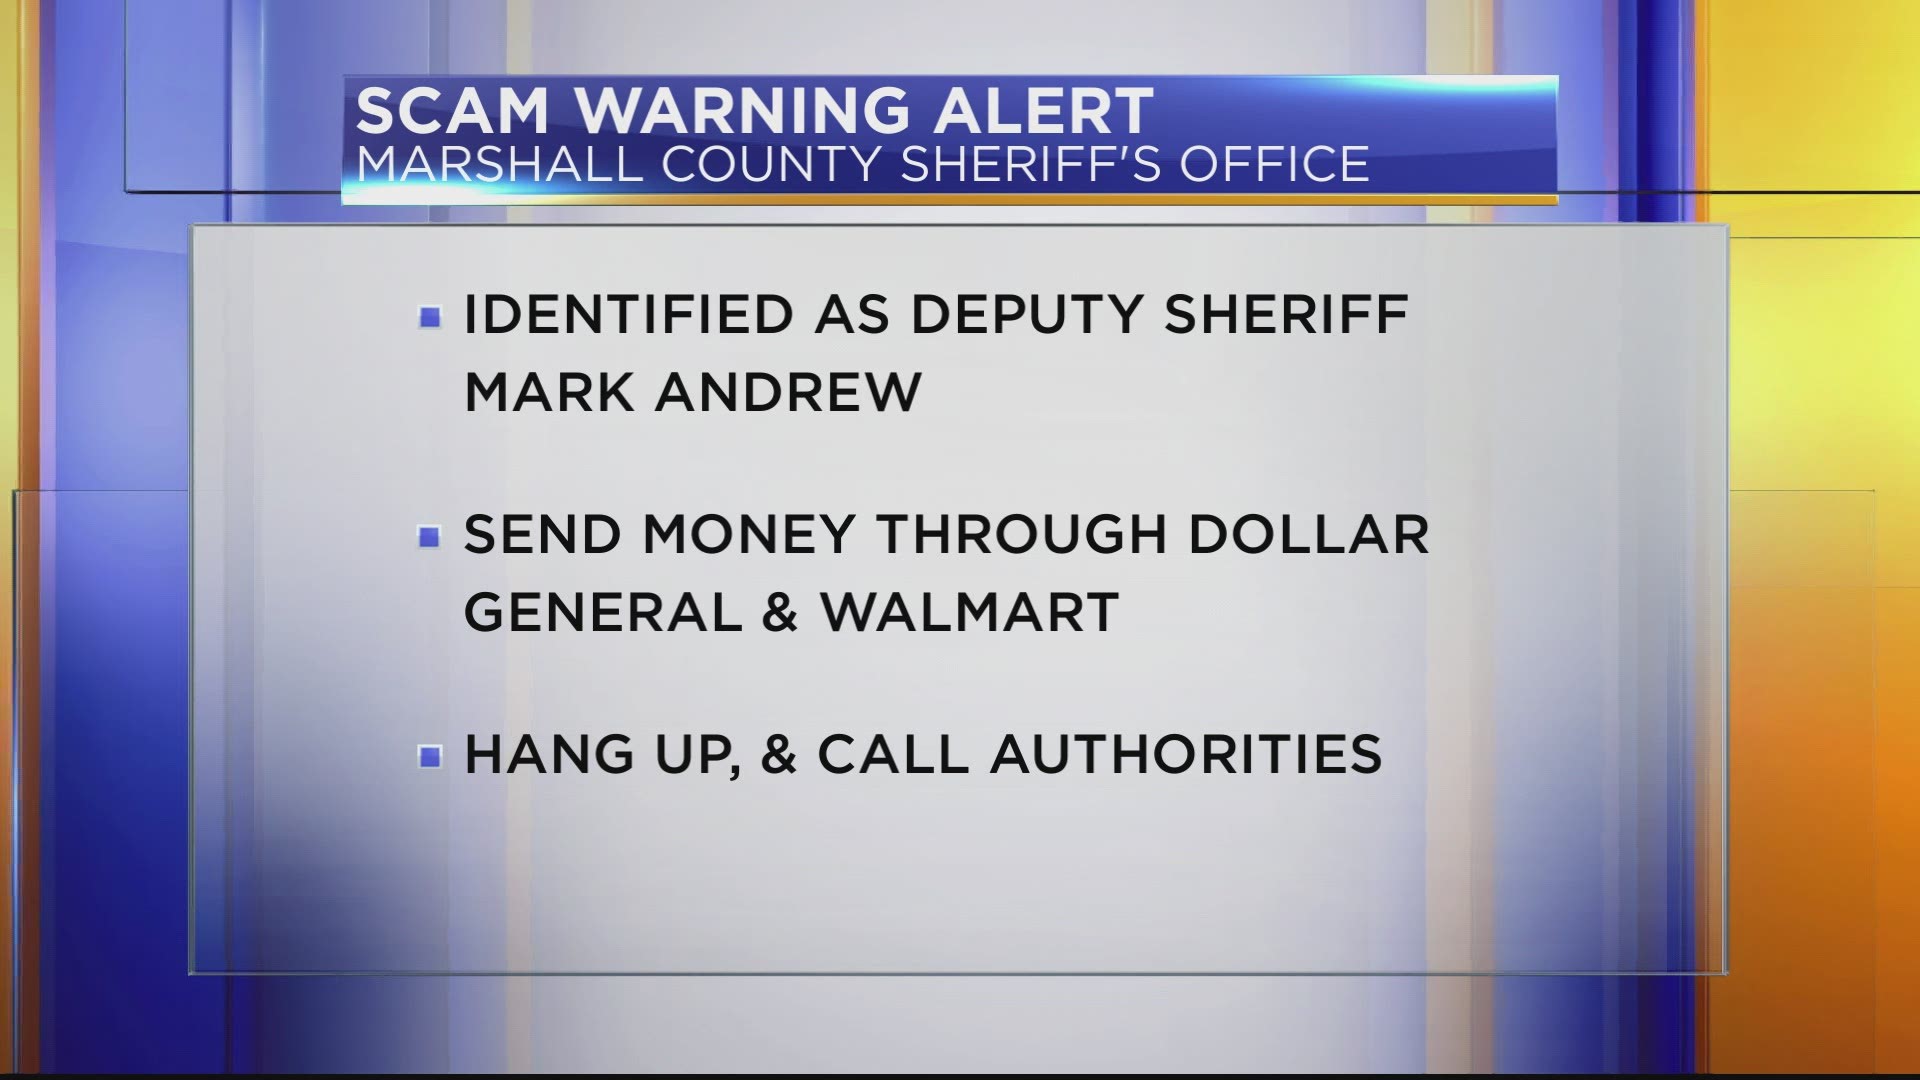 The Marshall County Sheriff's Office is warning about a scam in which someone pretends to be a sheriff's deputy to take your money.